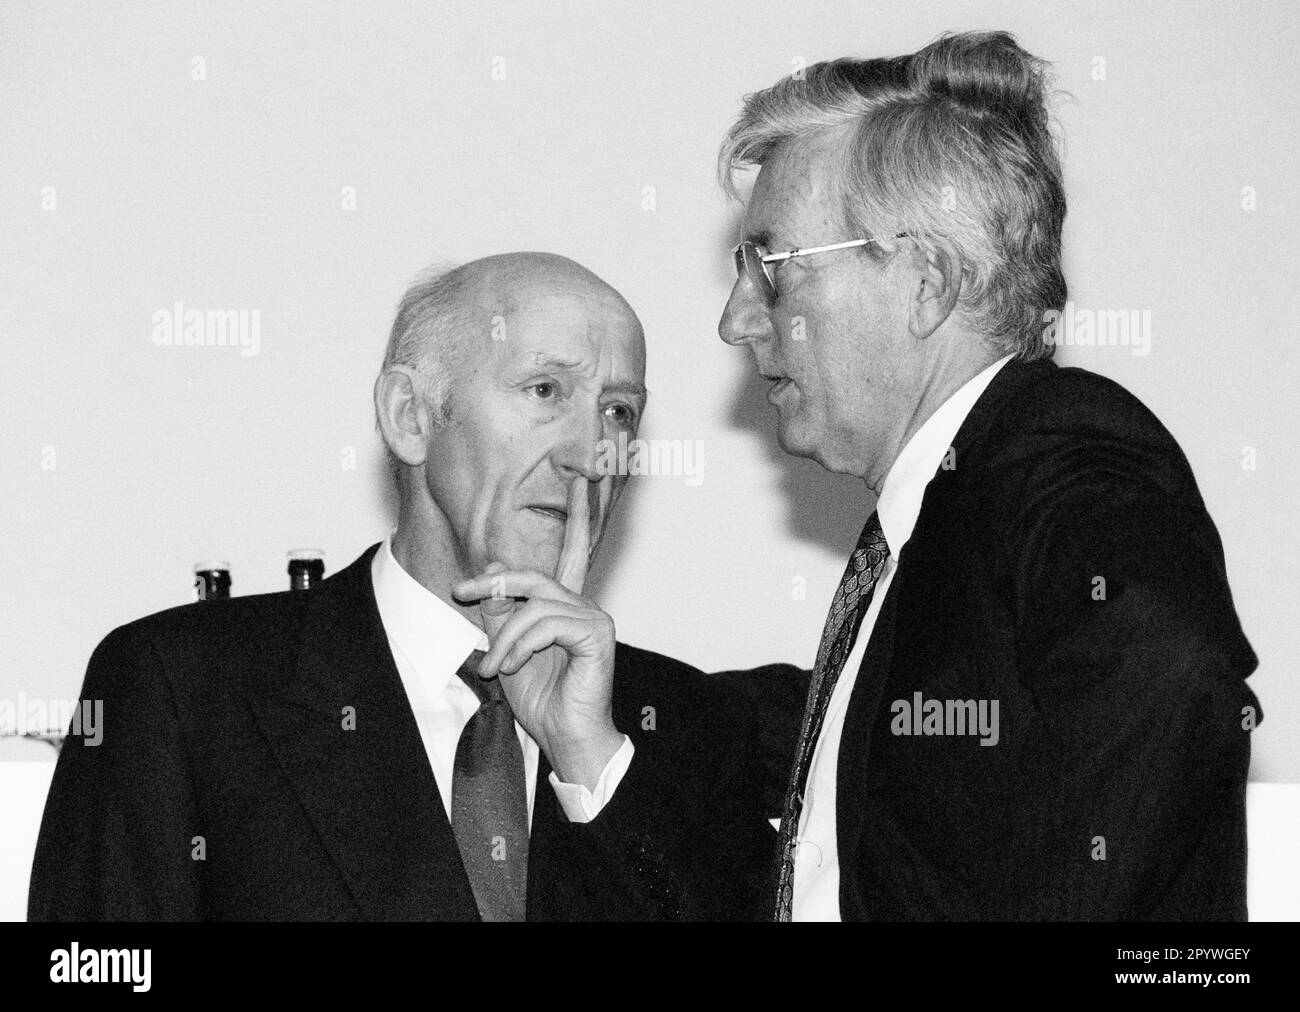 Werner DIETER , Chairman of the Executive Board of Mannesmann AG , and Klaus LIESEN , Chairman of the Executive Board of Ruhrgas AG , October 1991 [automated translation] Stock Photo